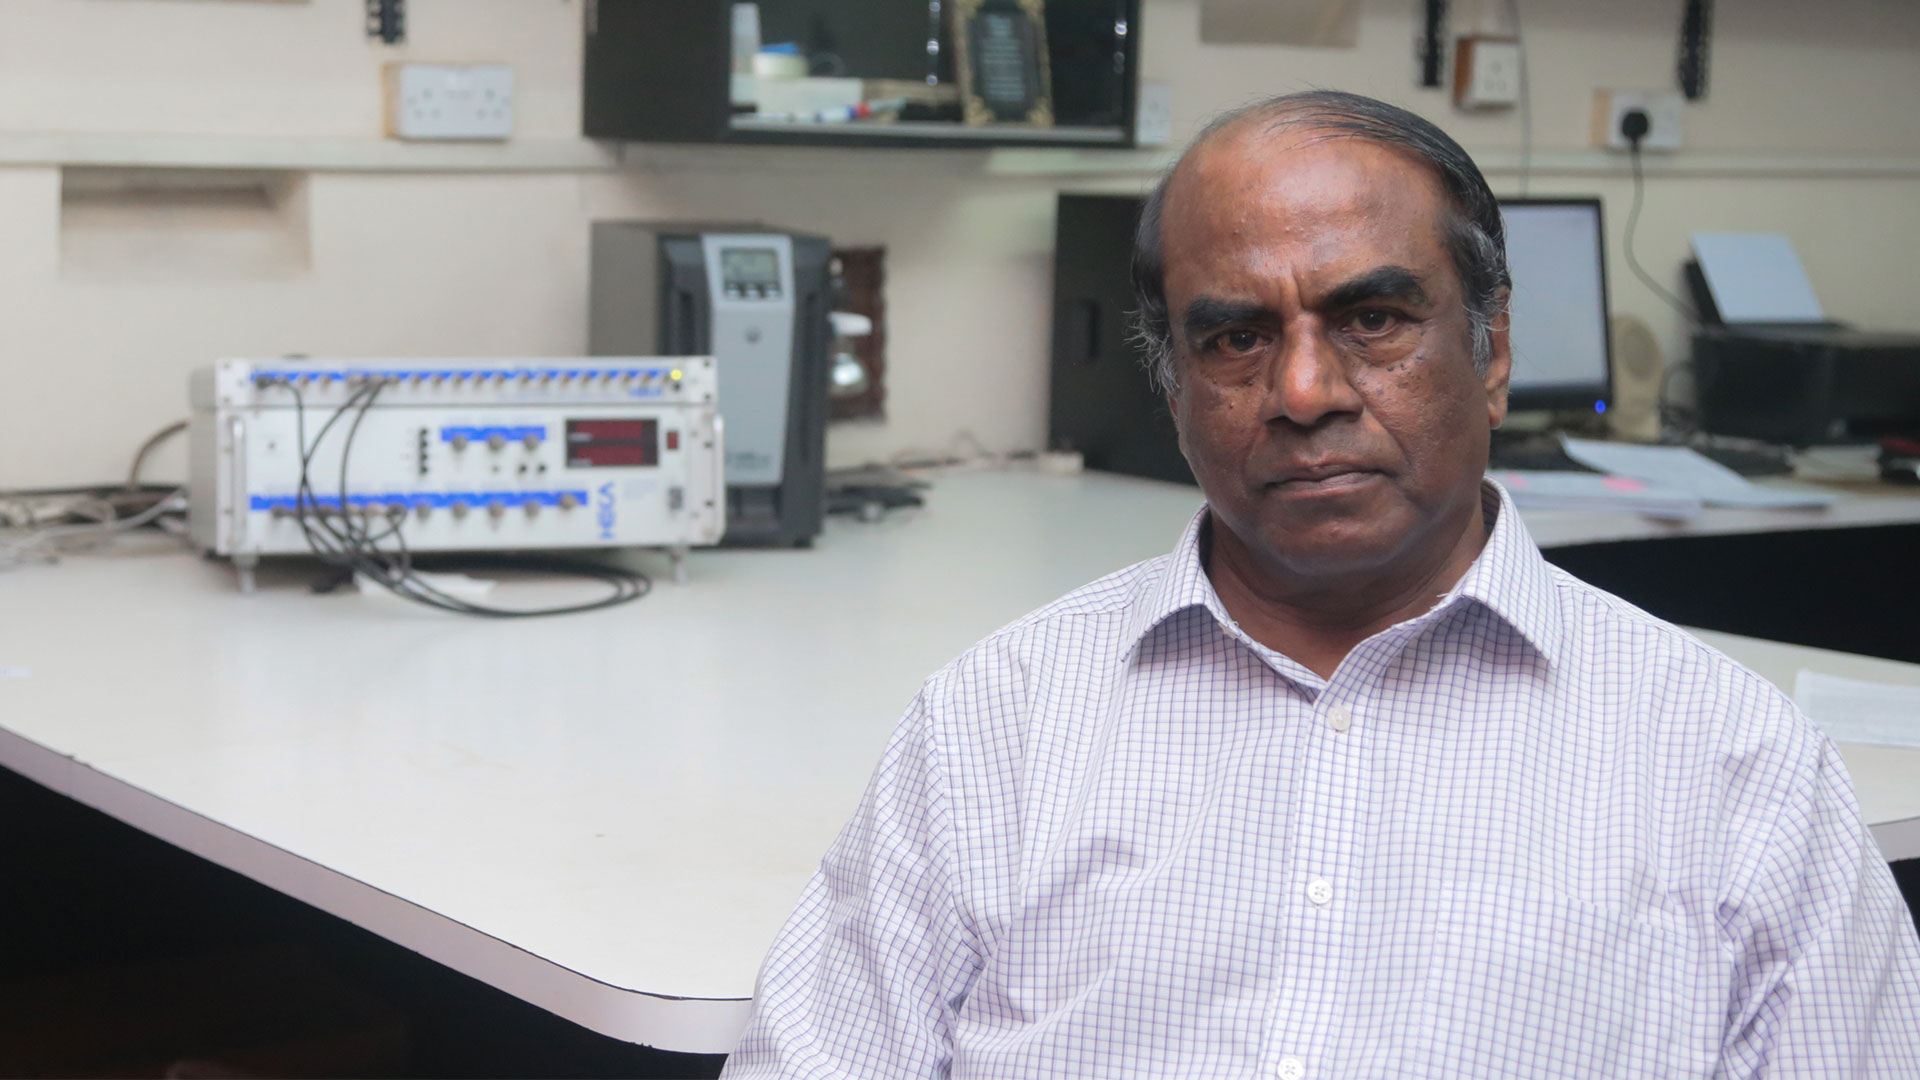 Professor Dissanayake ranked among the top 2% of researchers in the world